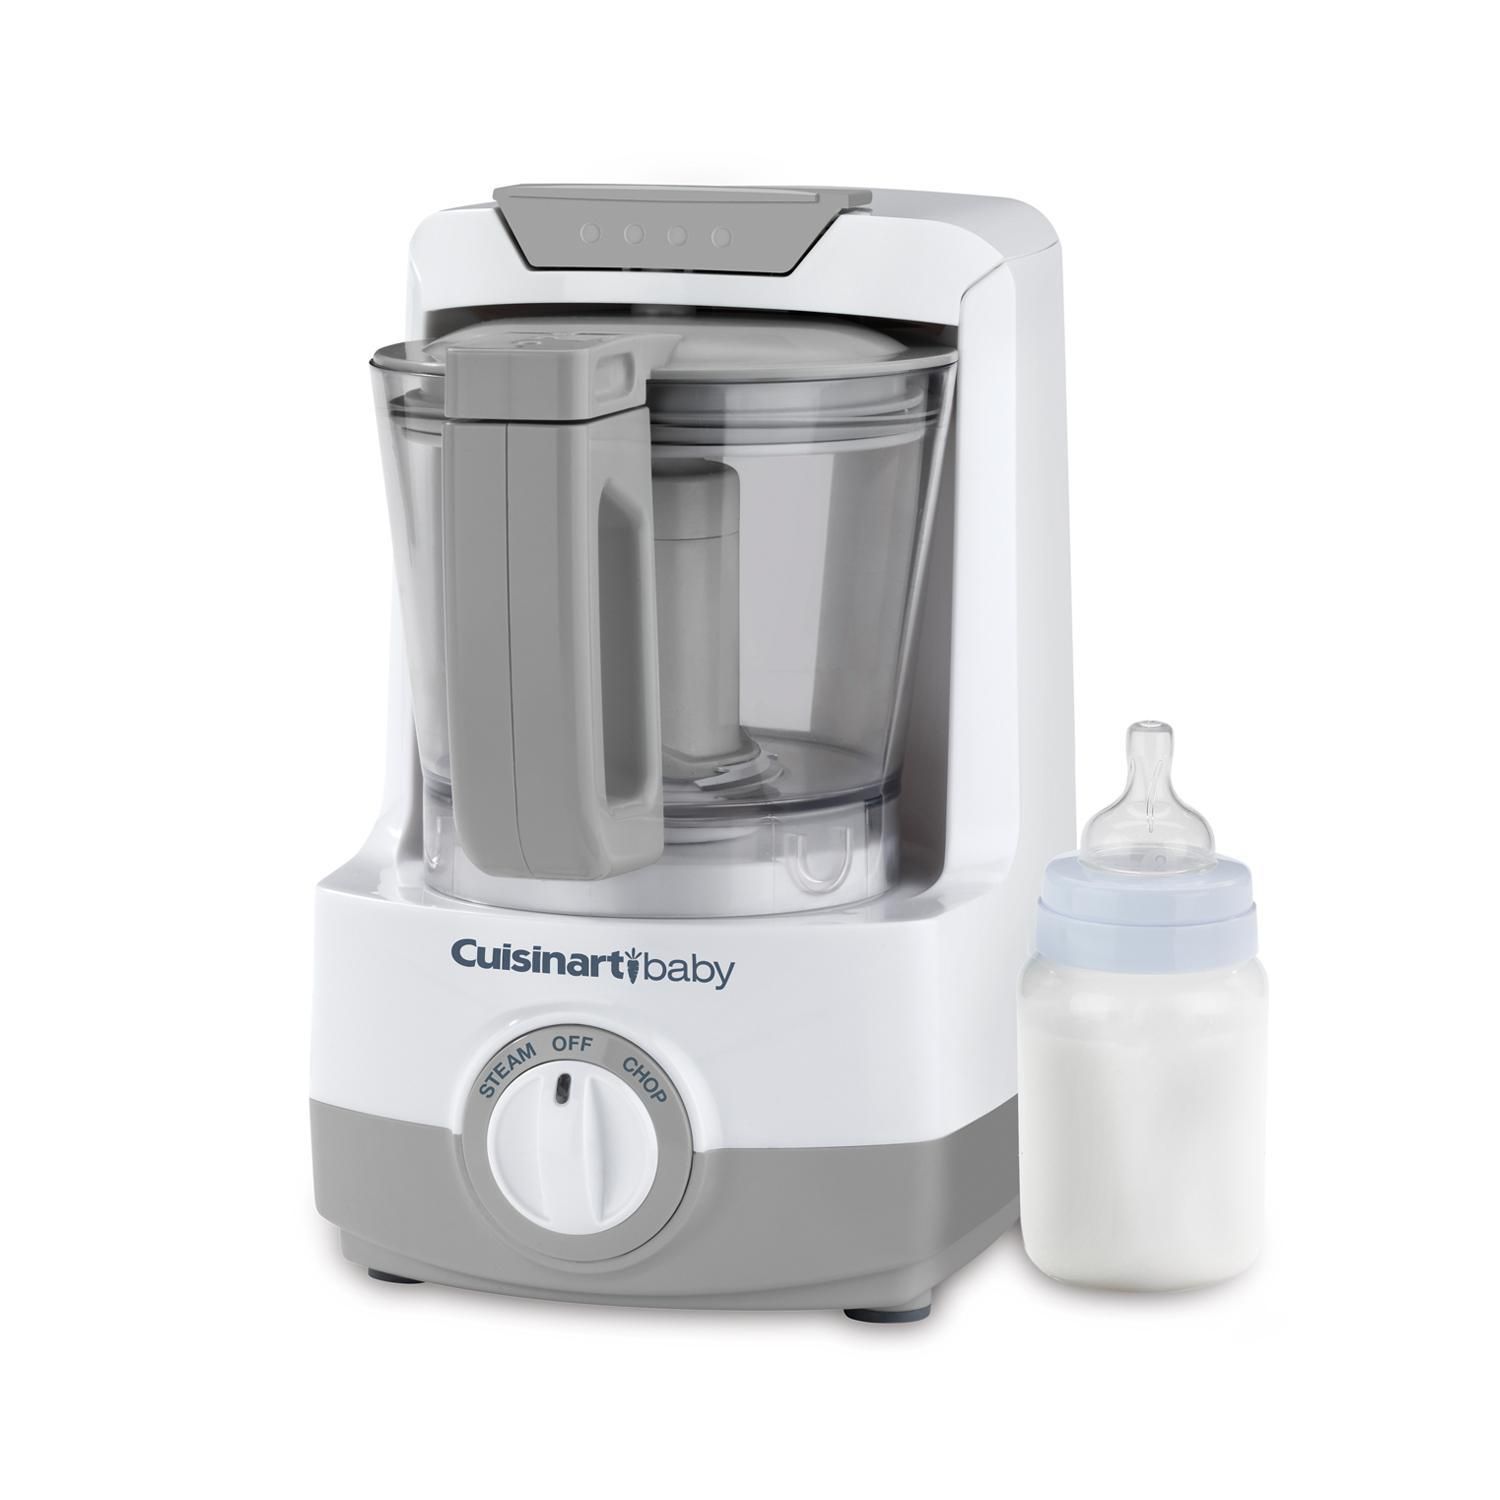 Cuisinart 2-in-1 Baby Food Maker and Bottle Warmer - BFM-1000C